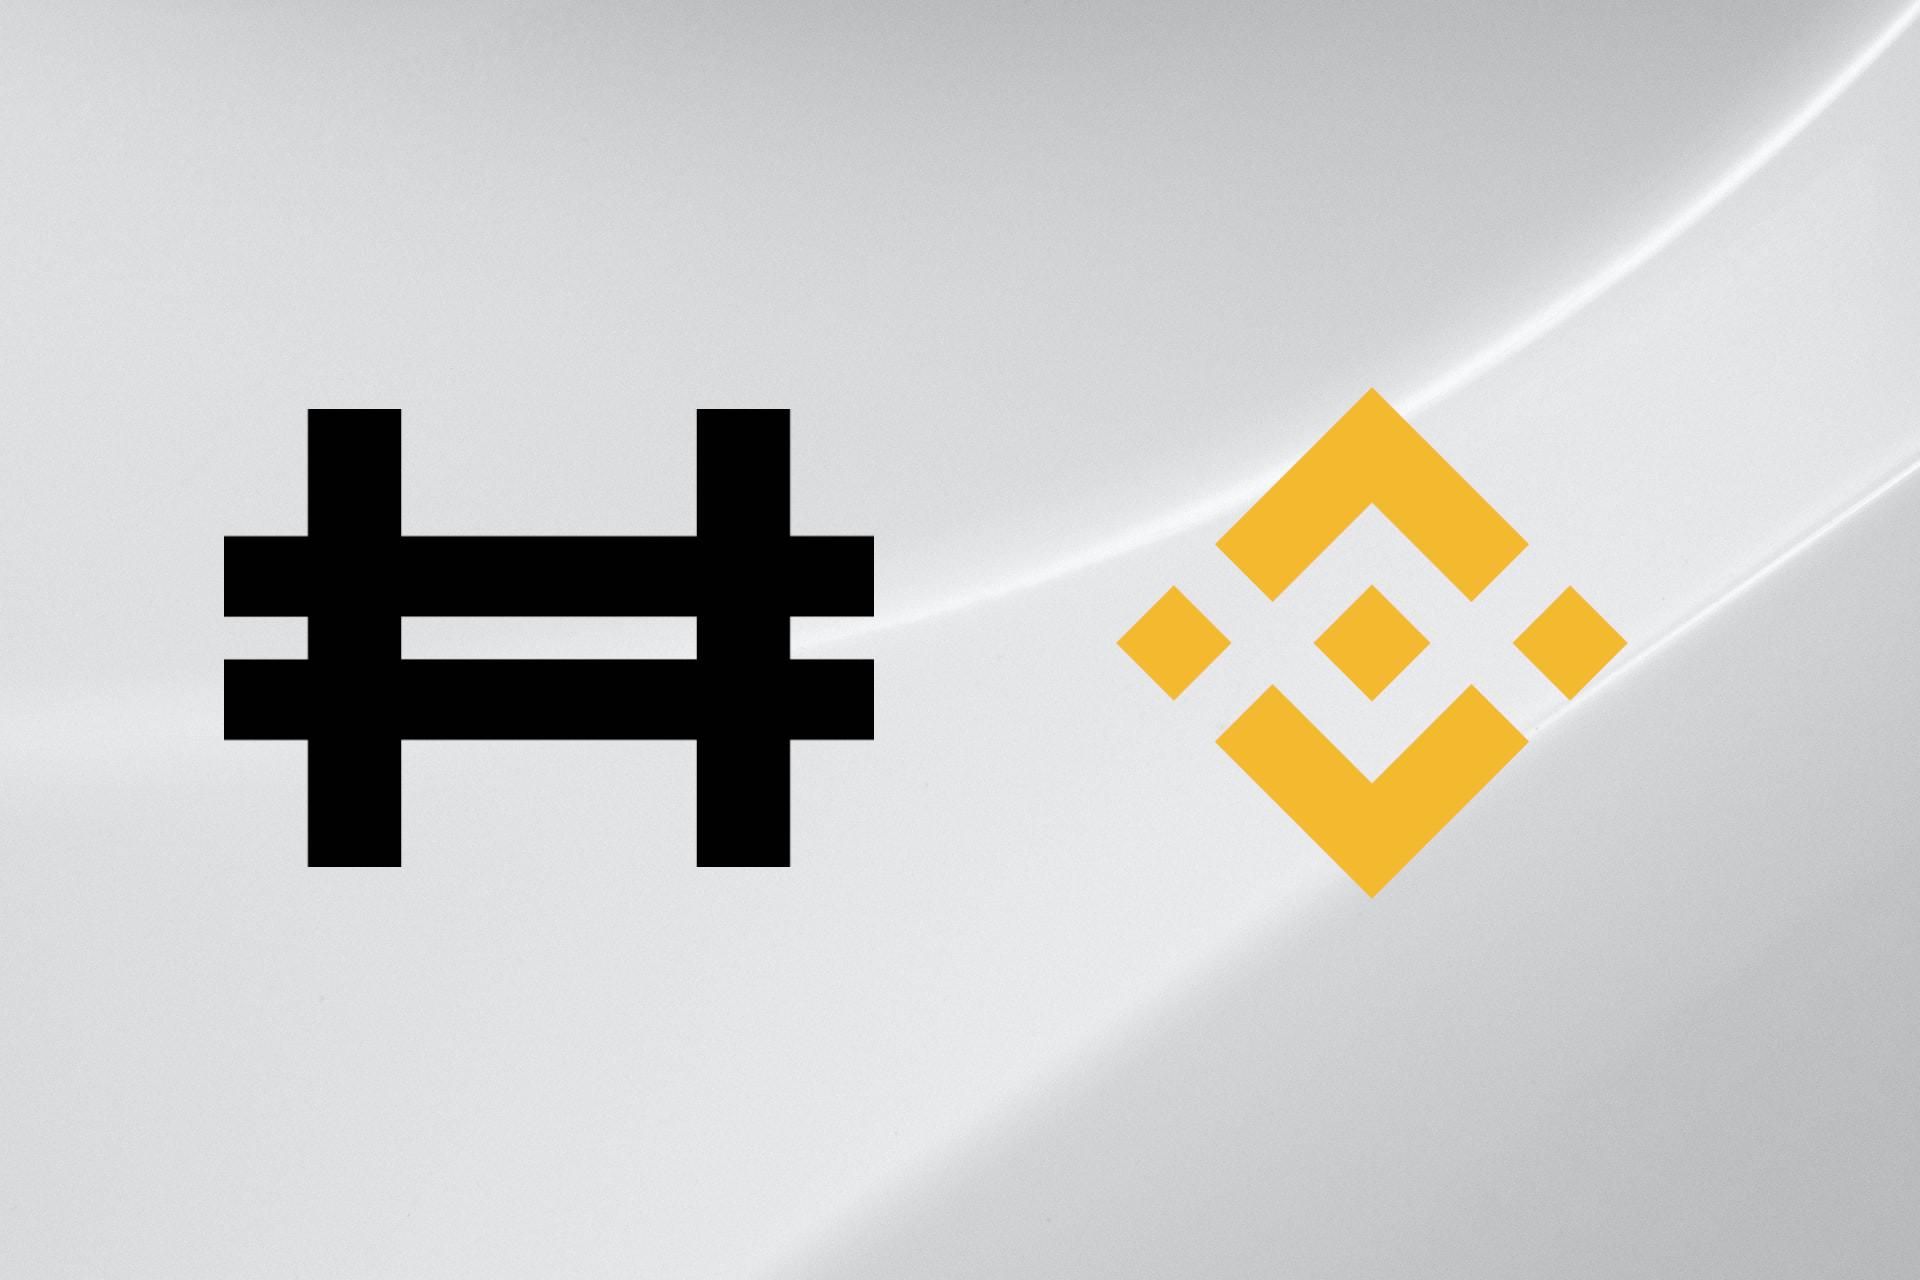 Hashflow (HFT) gets listed on Binance cover image